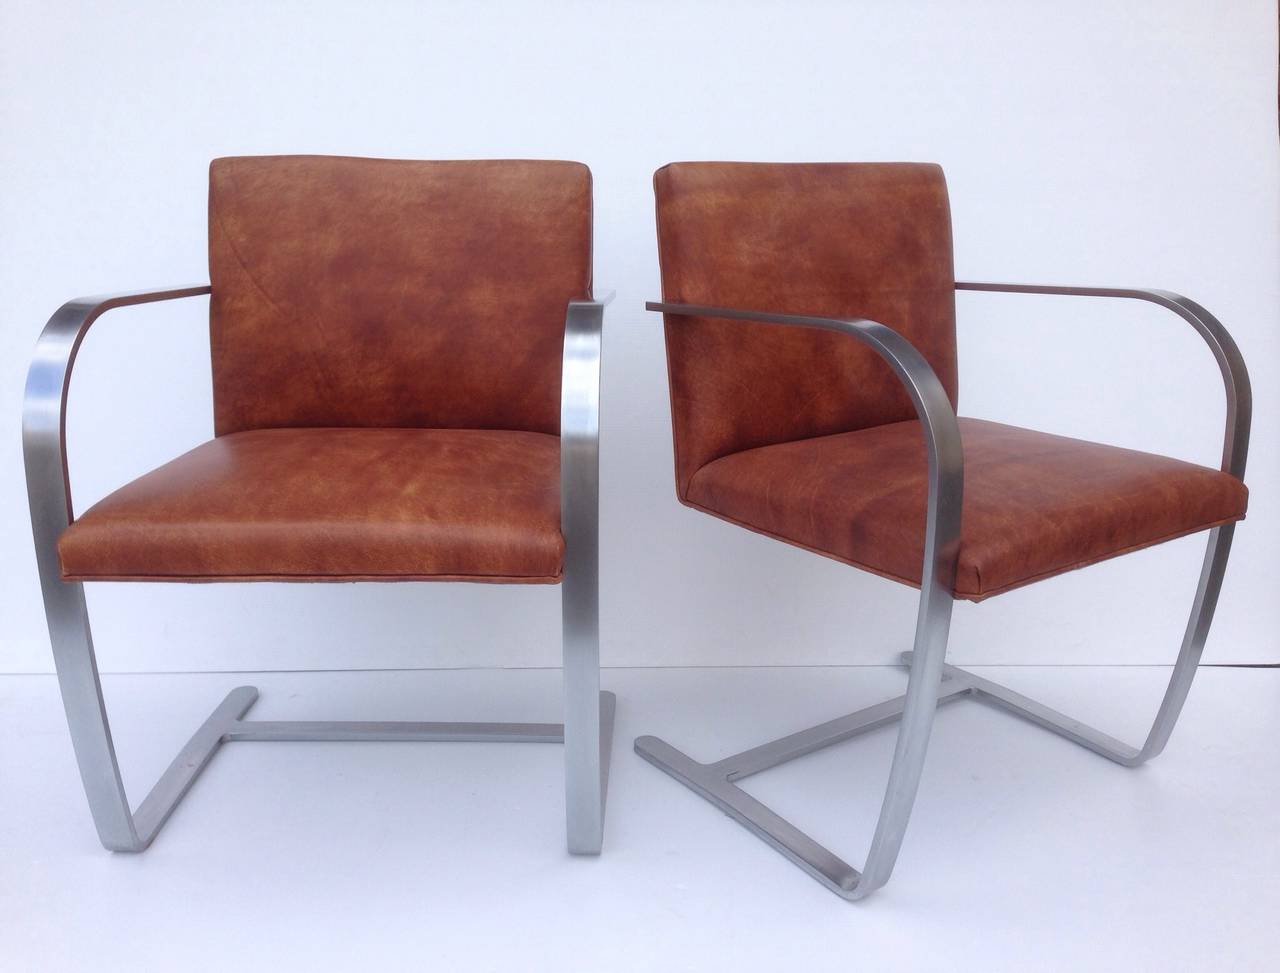 One Two or Three Brno Mid-Century Mies van der Rohe Arm Chairs In Good Condition For Sale In Bronx, NY